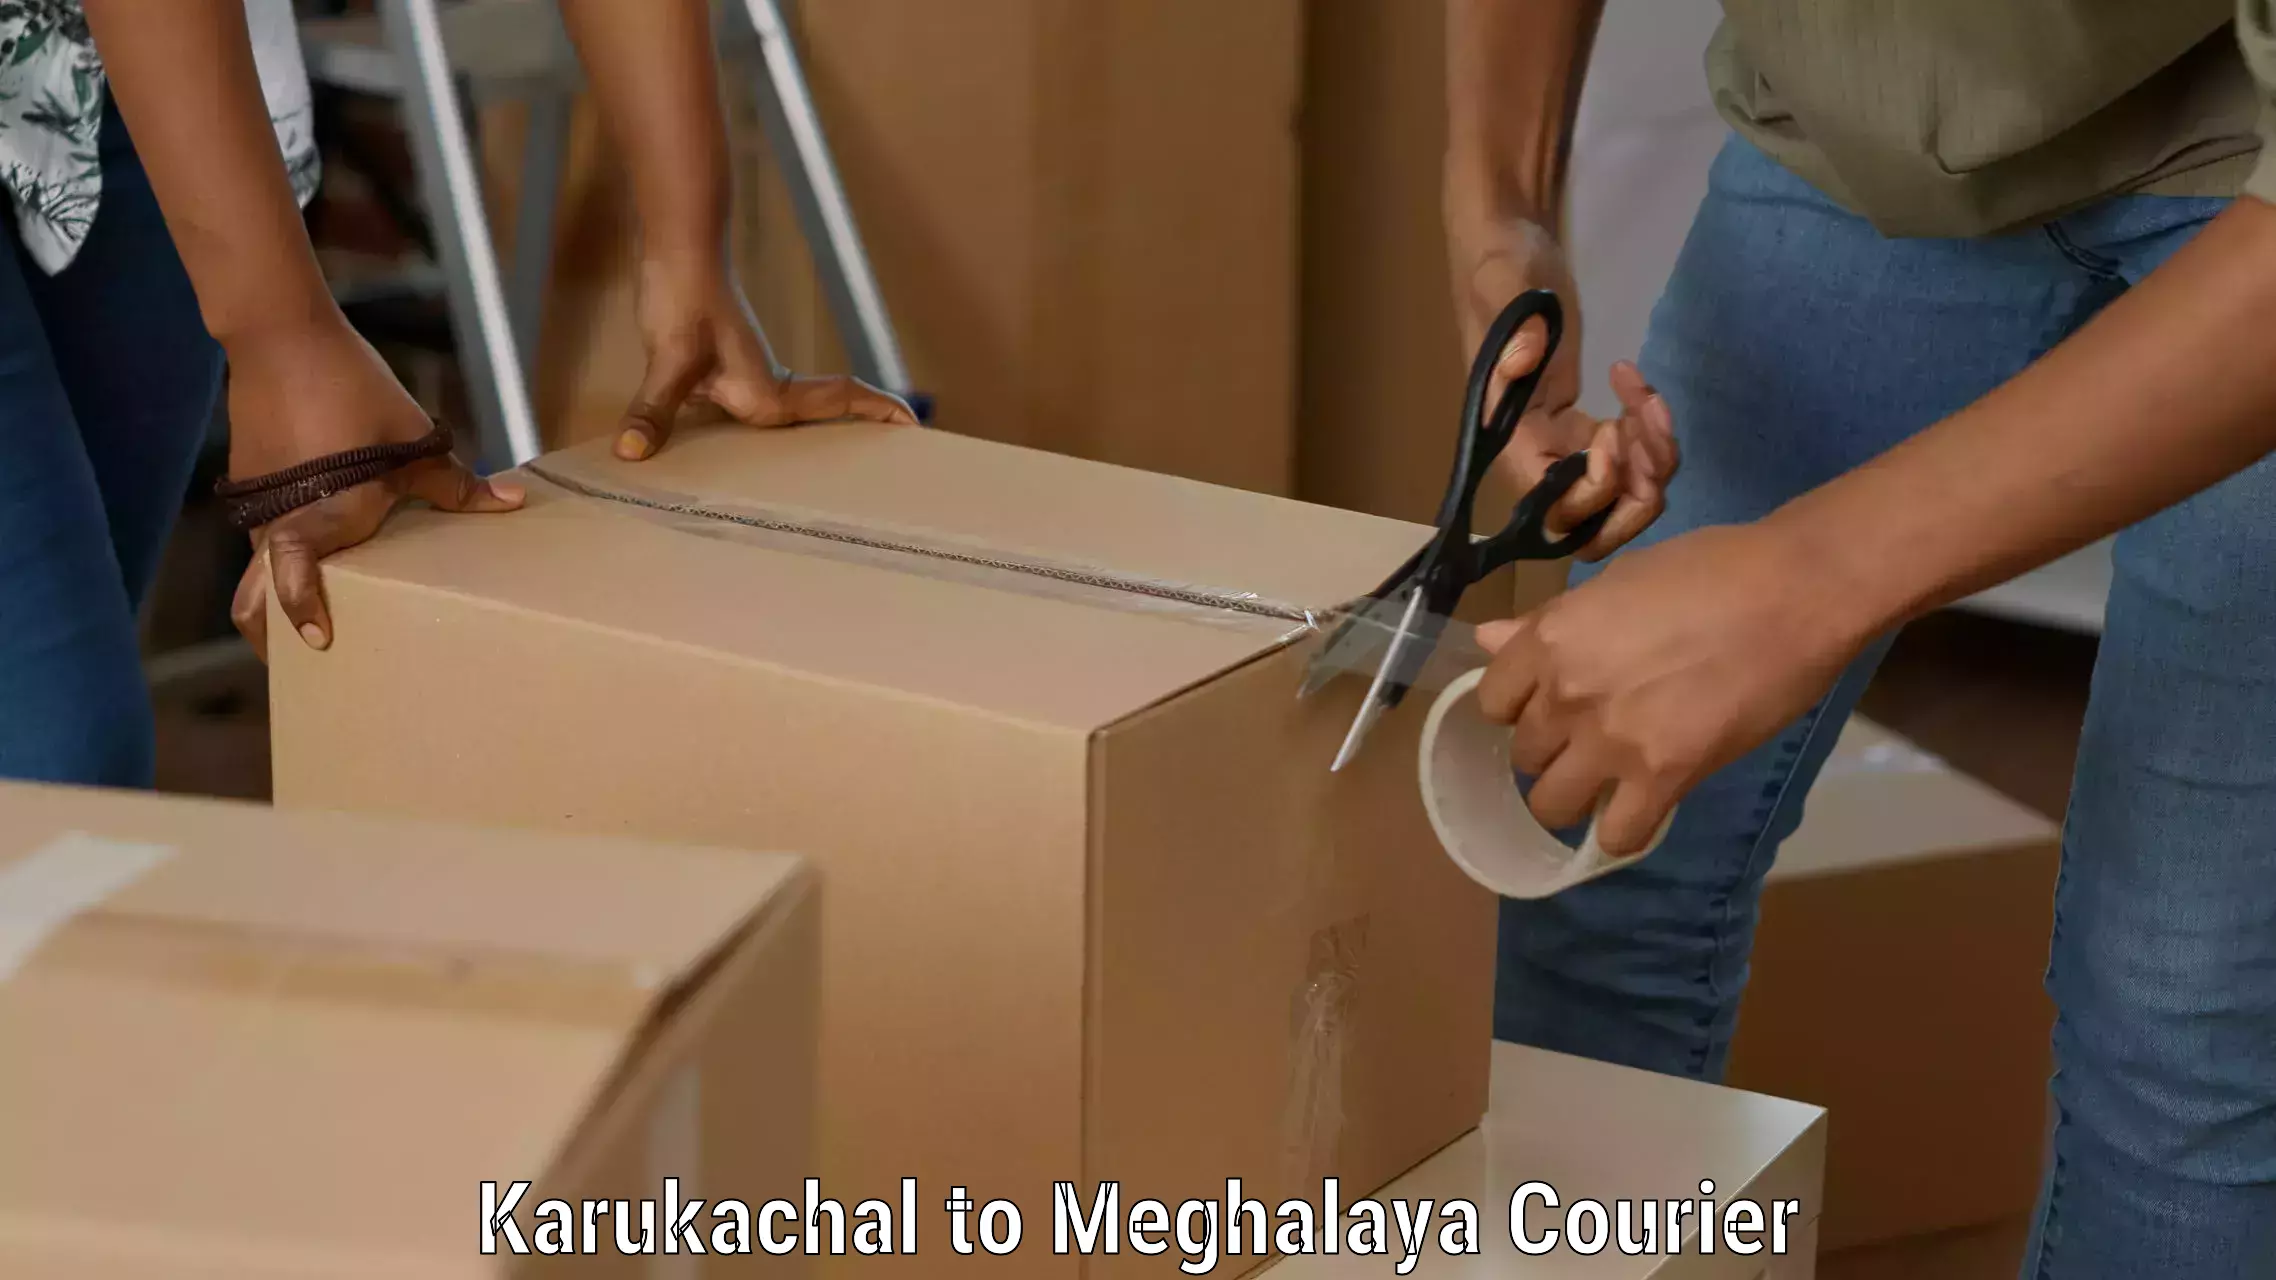 Reliable courier service Karukachal to Meghalaya